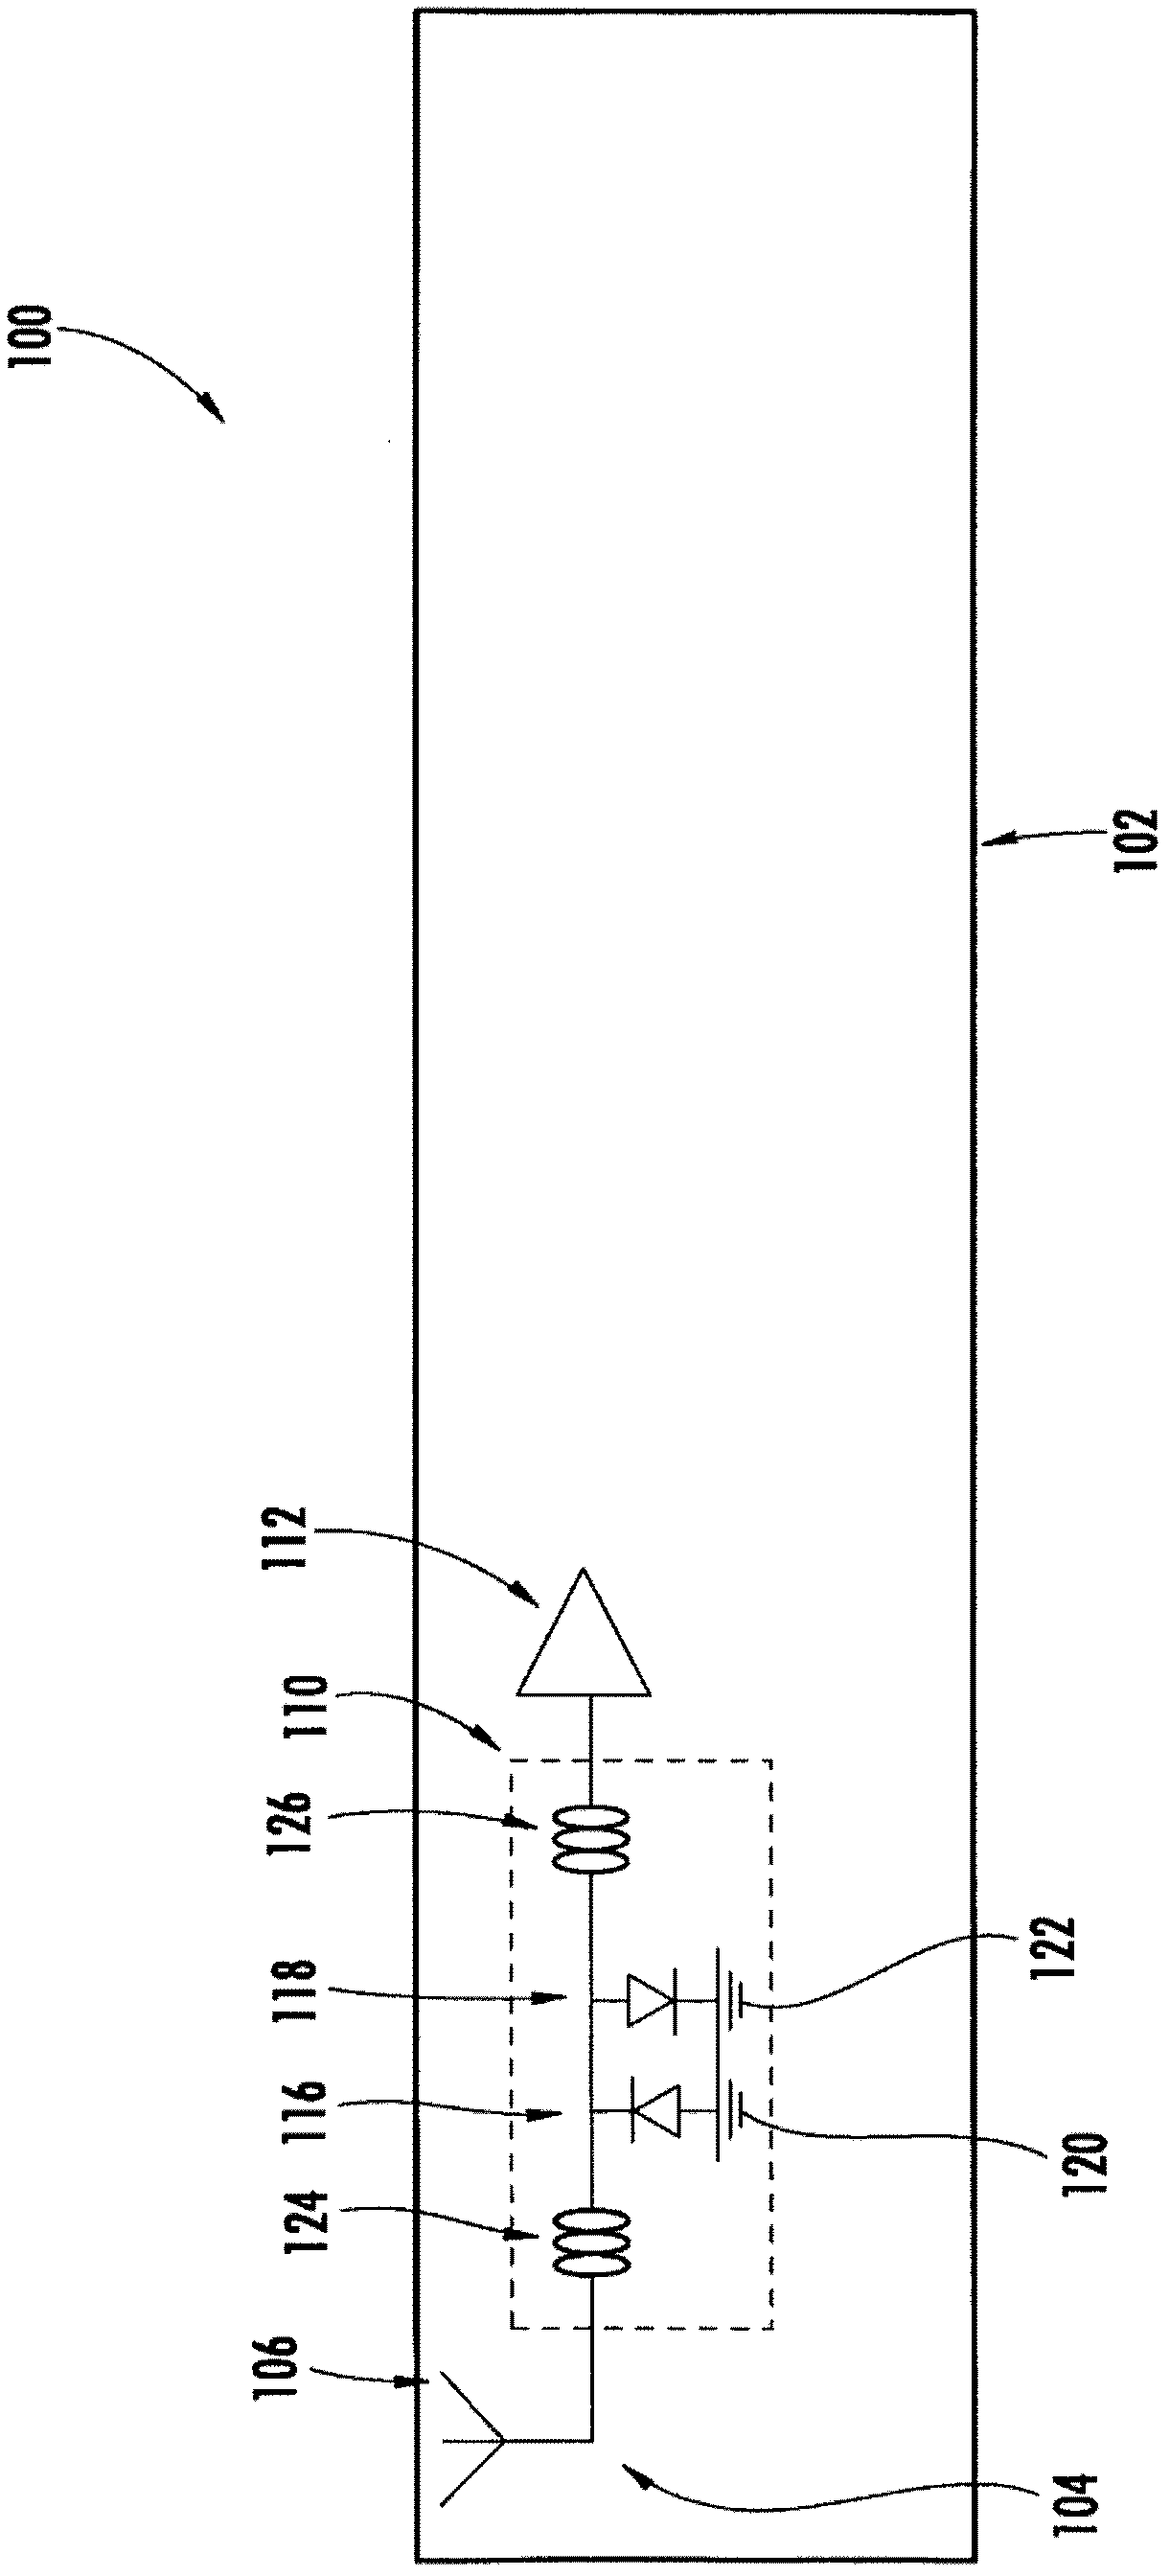 Antenna assemblies for use with portable communications devices